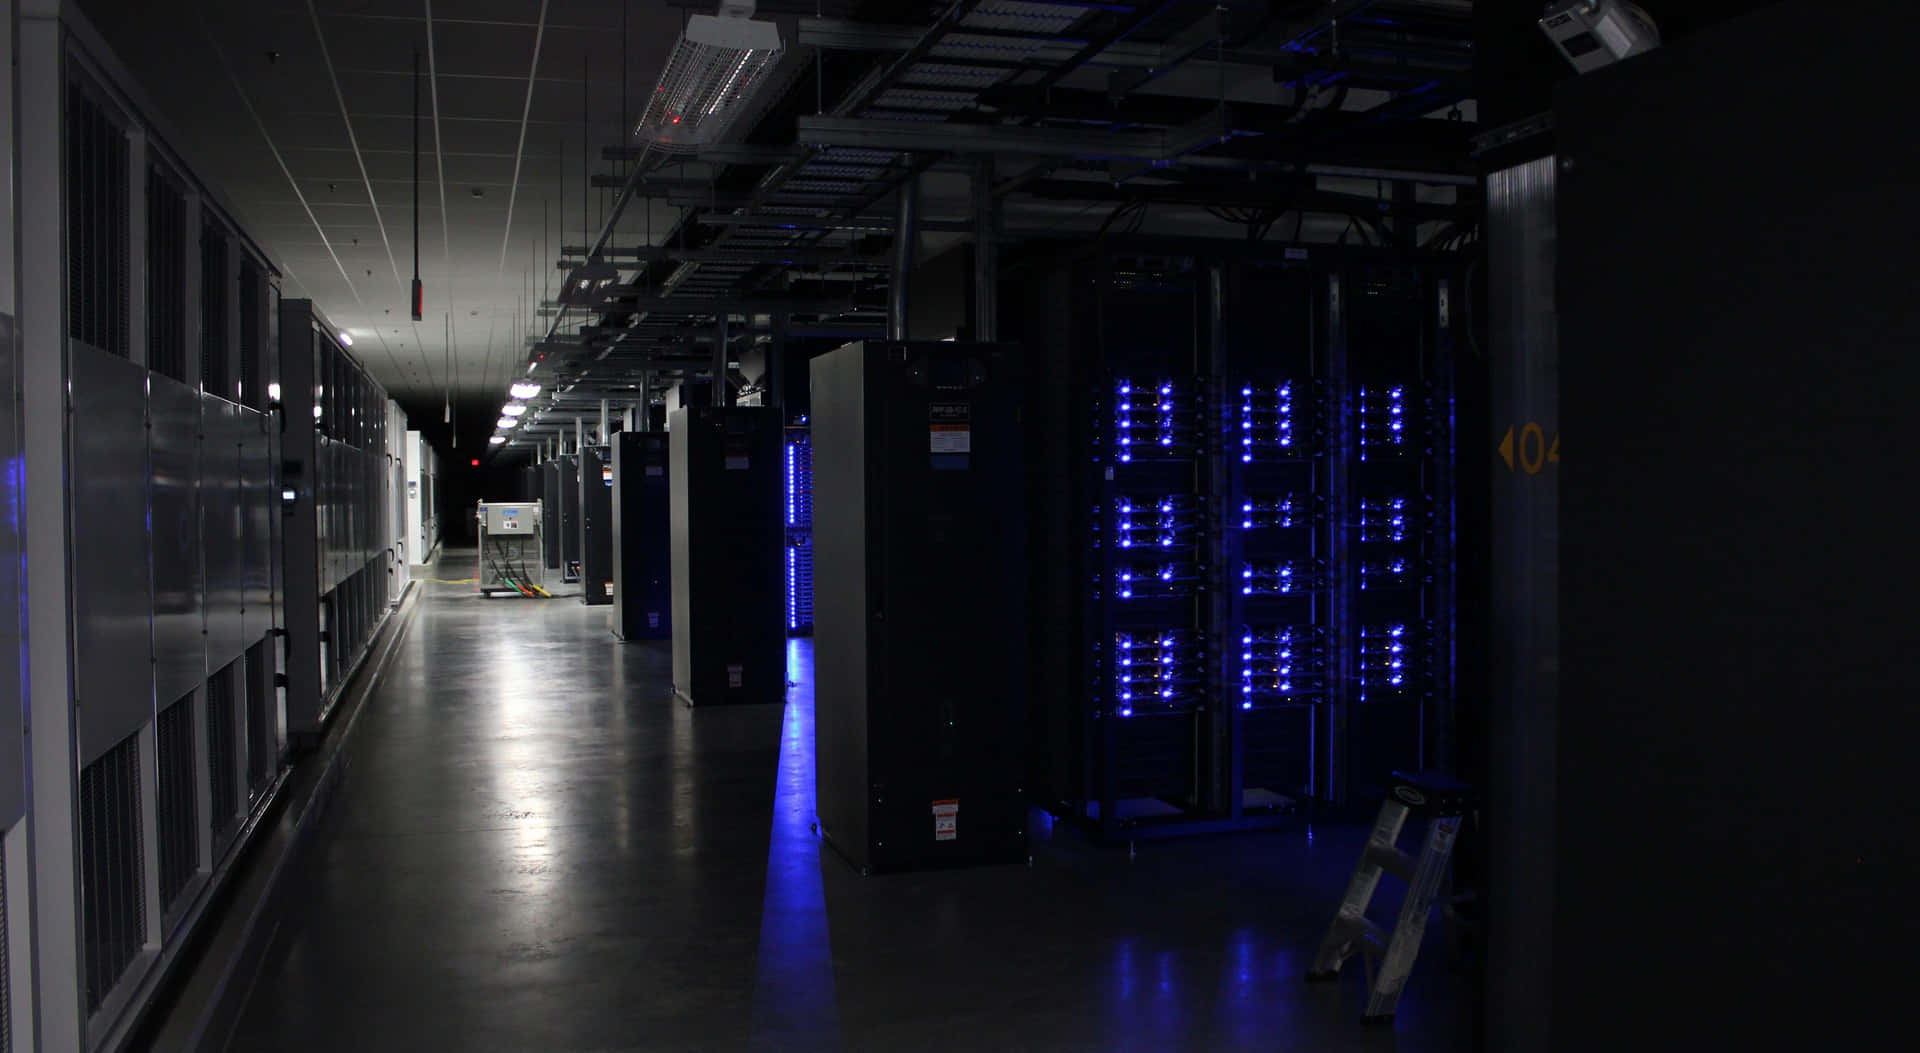 A Long Hallway With Many Servers